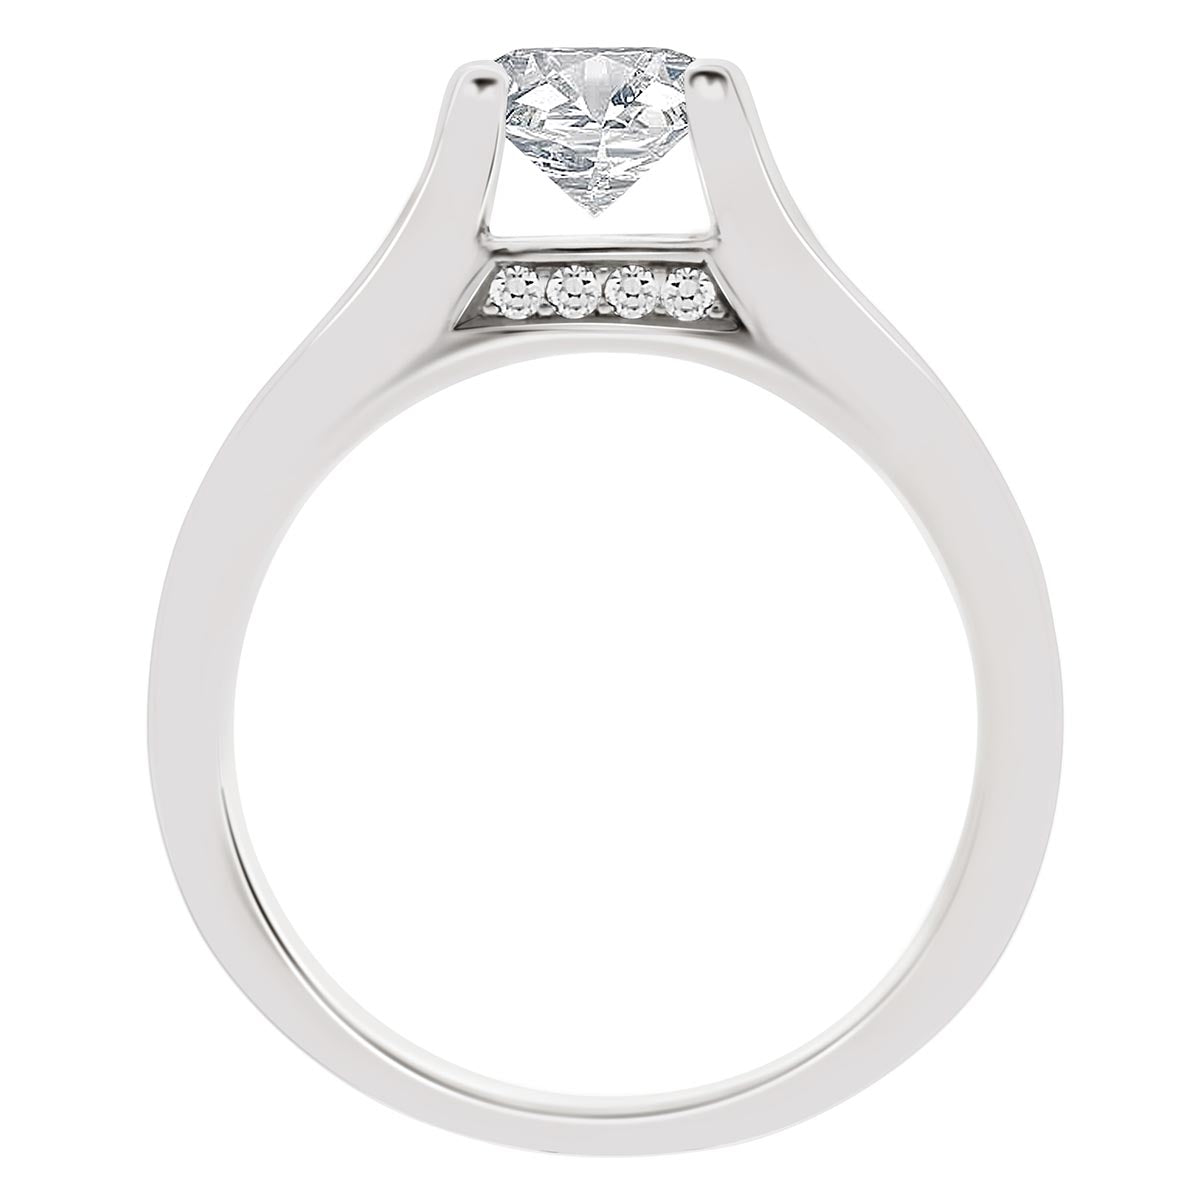 Channel Set Diamond Ring set in white gold standing upright 